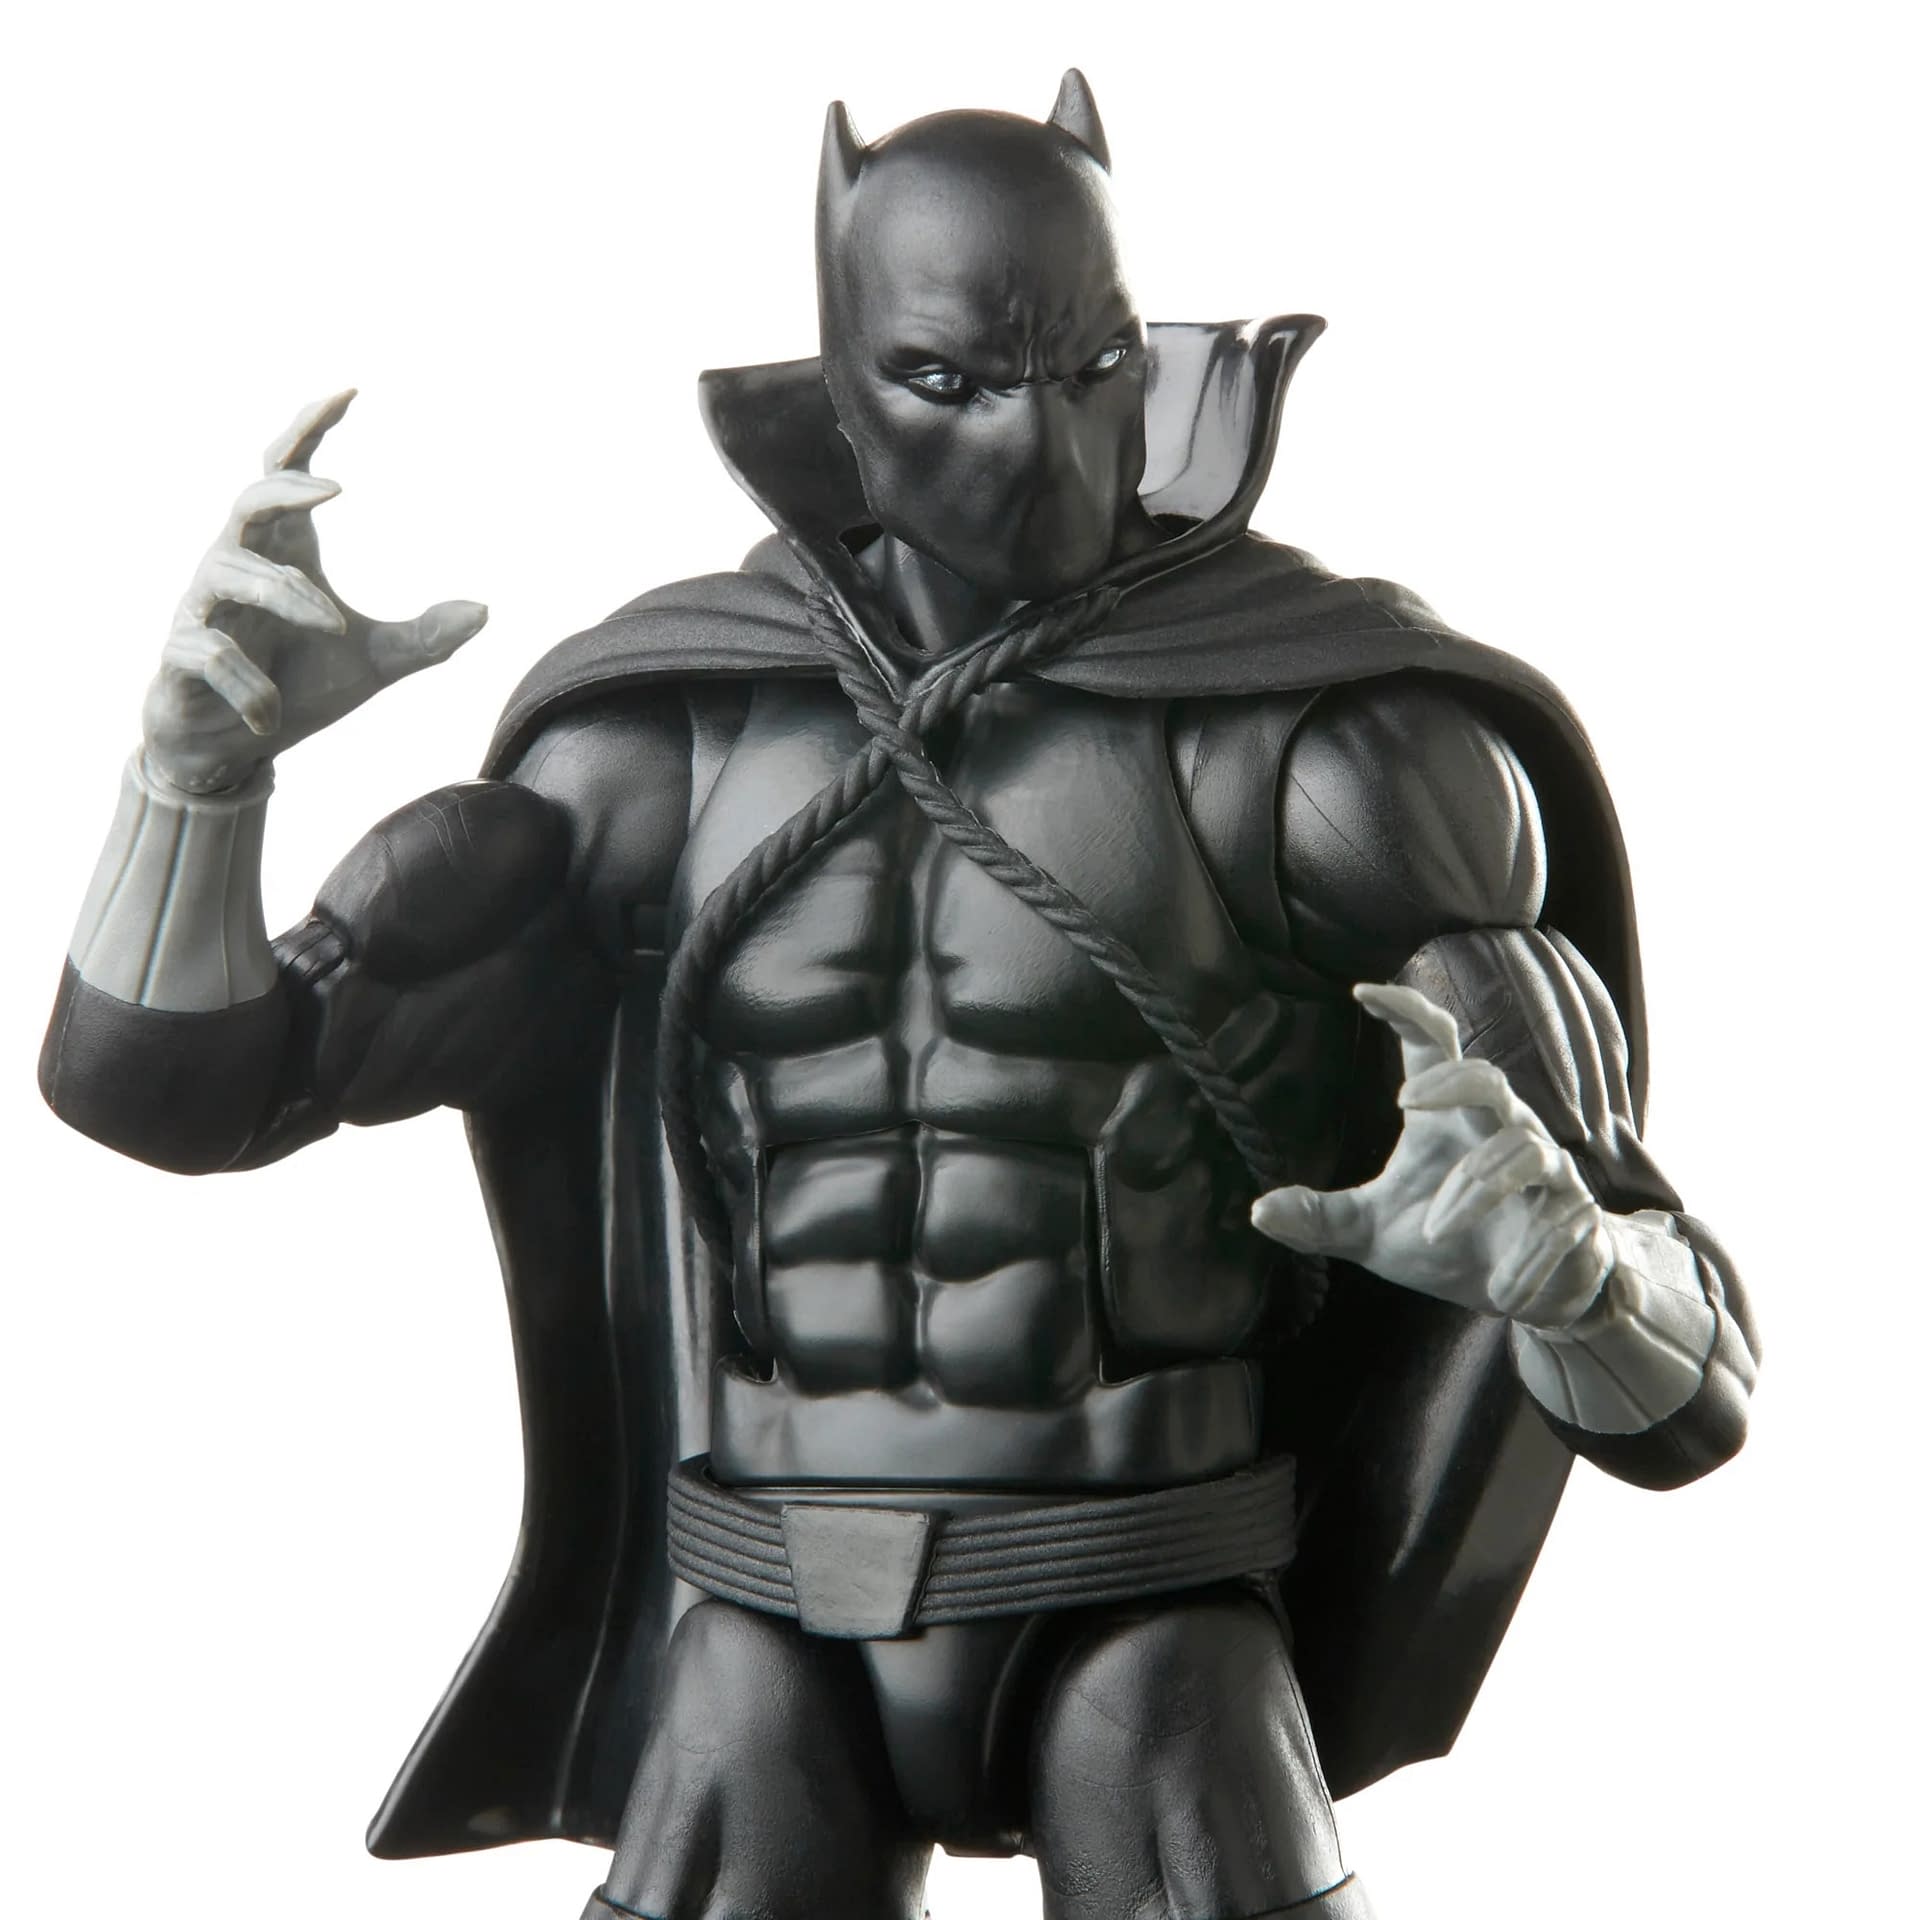 Black Panther Jumps Right Out of the Comics with New Legends Figure 